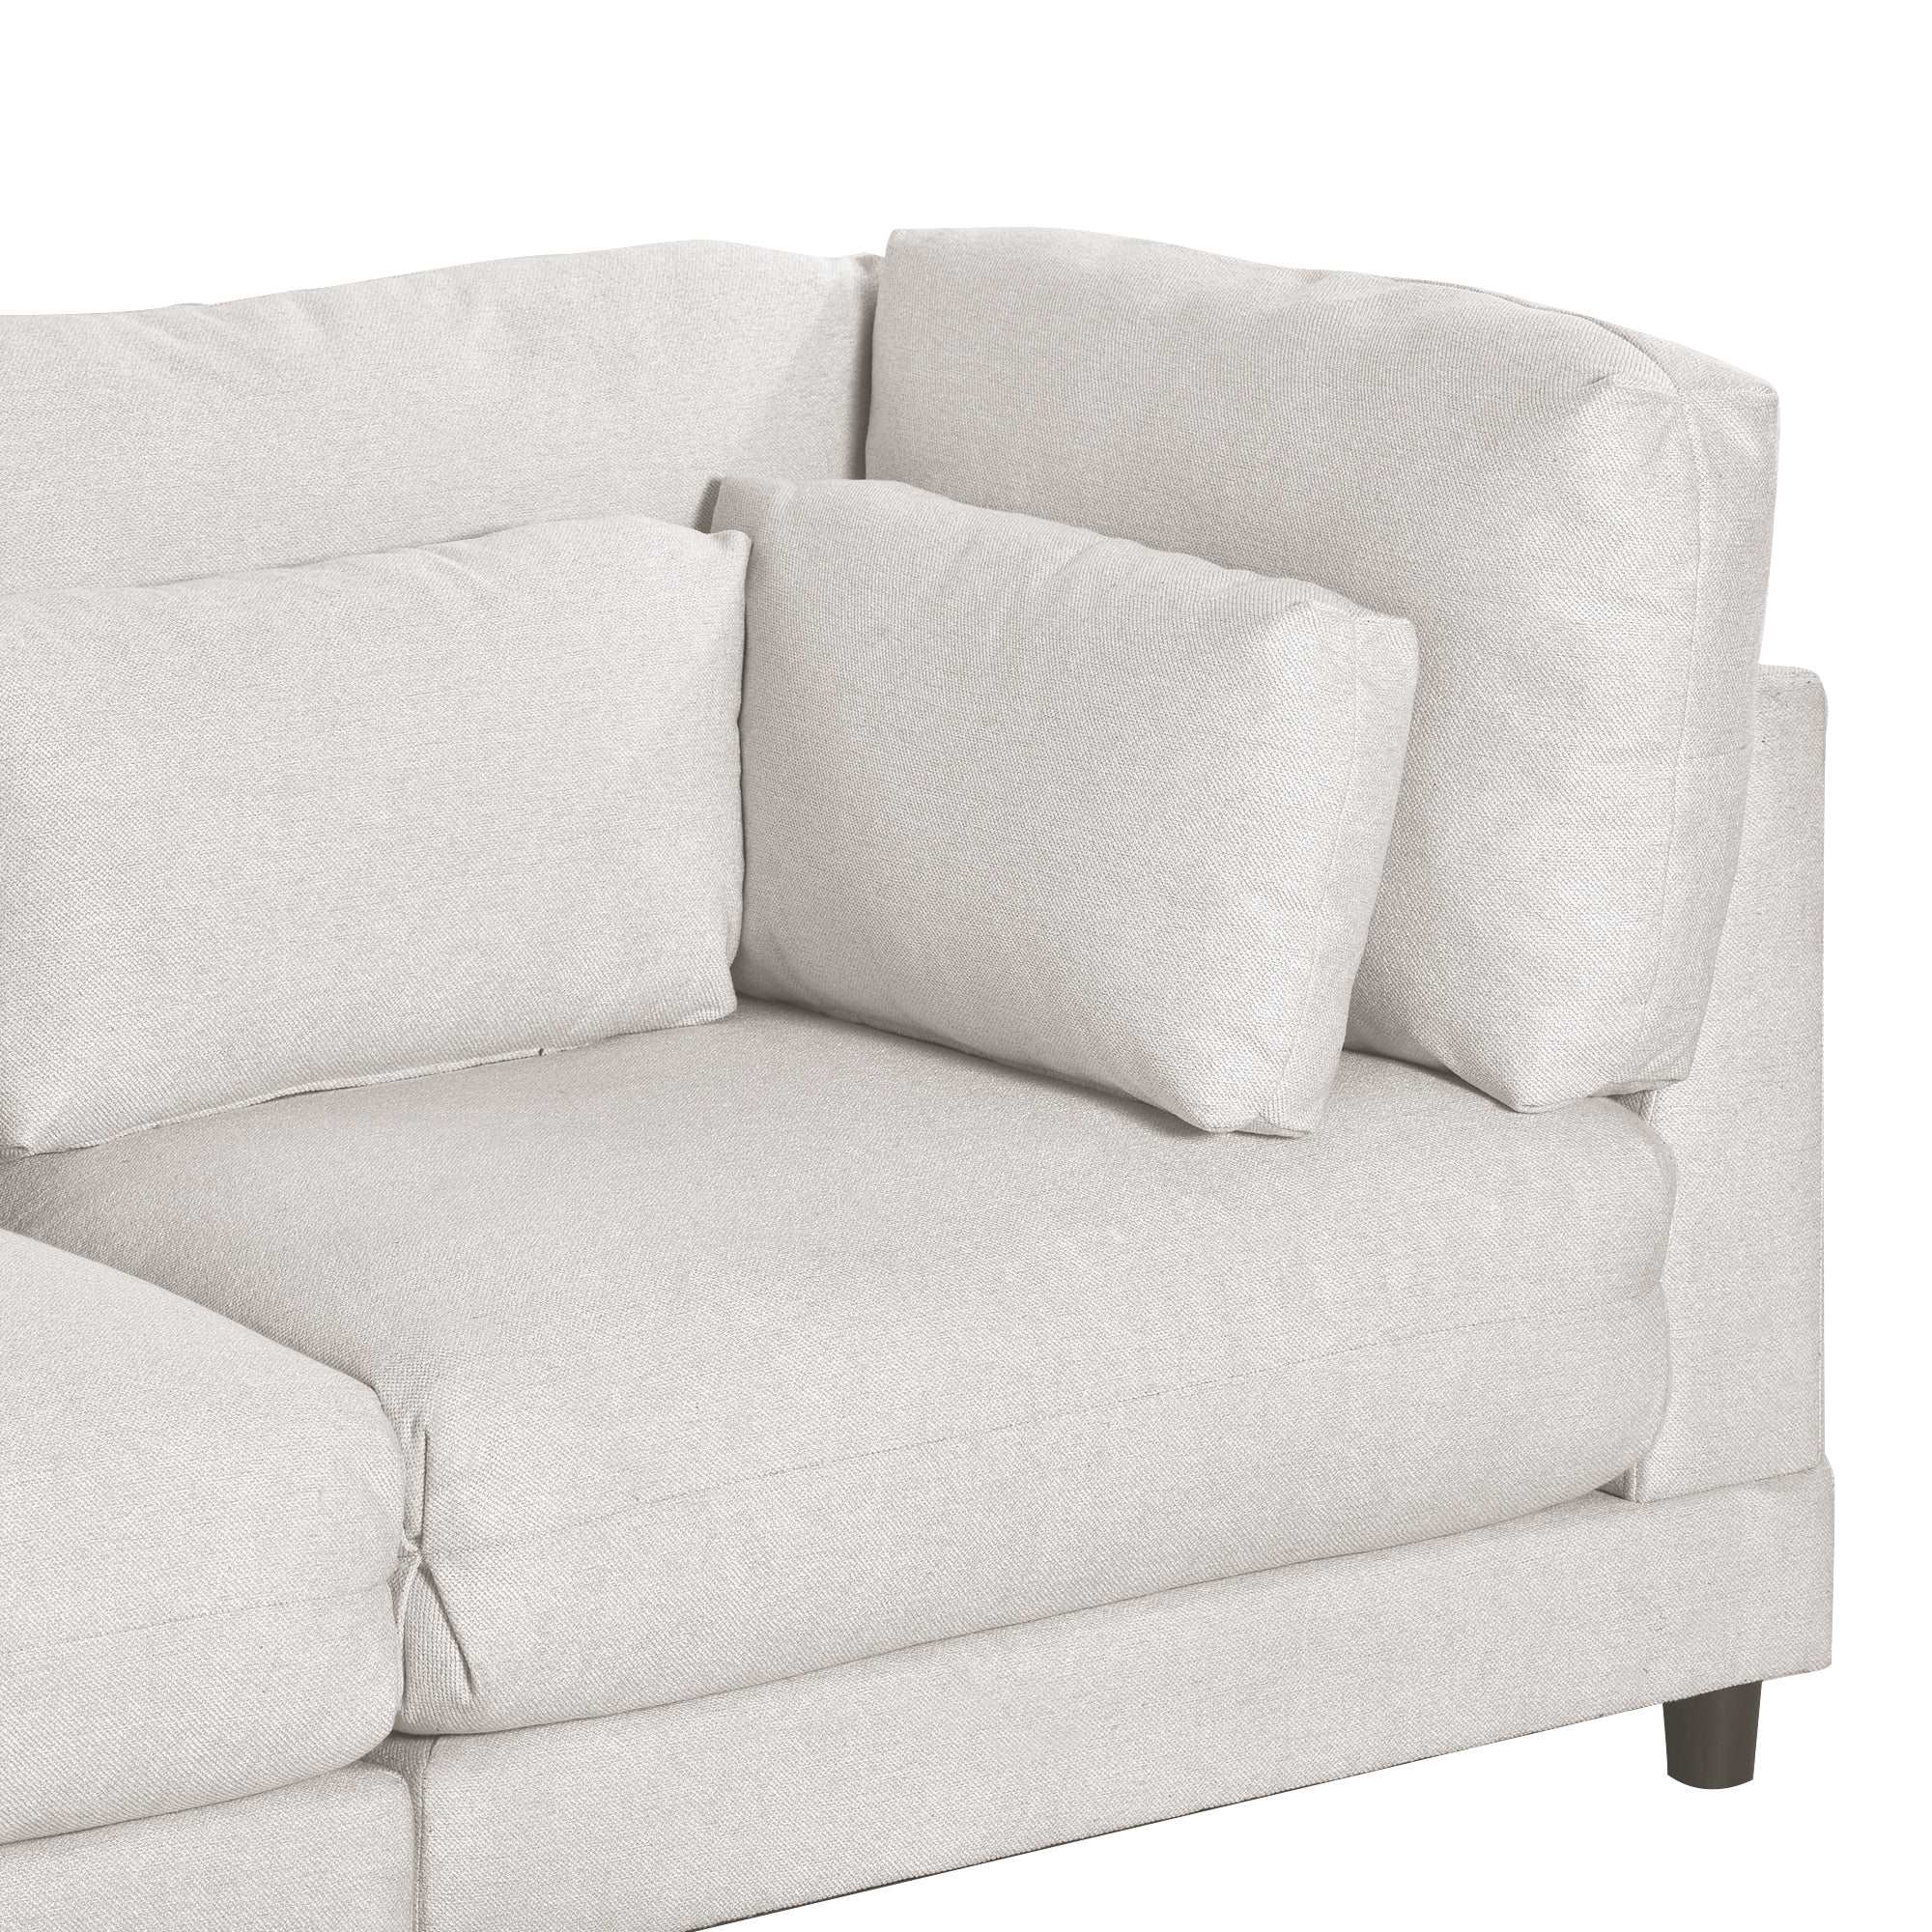 Bellemave 110.6" 2 Pieces L shaped Sofa with Removable Ottomans and comfortable waist pillows